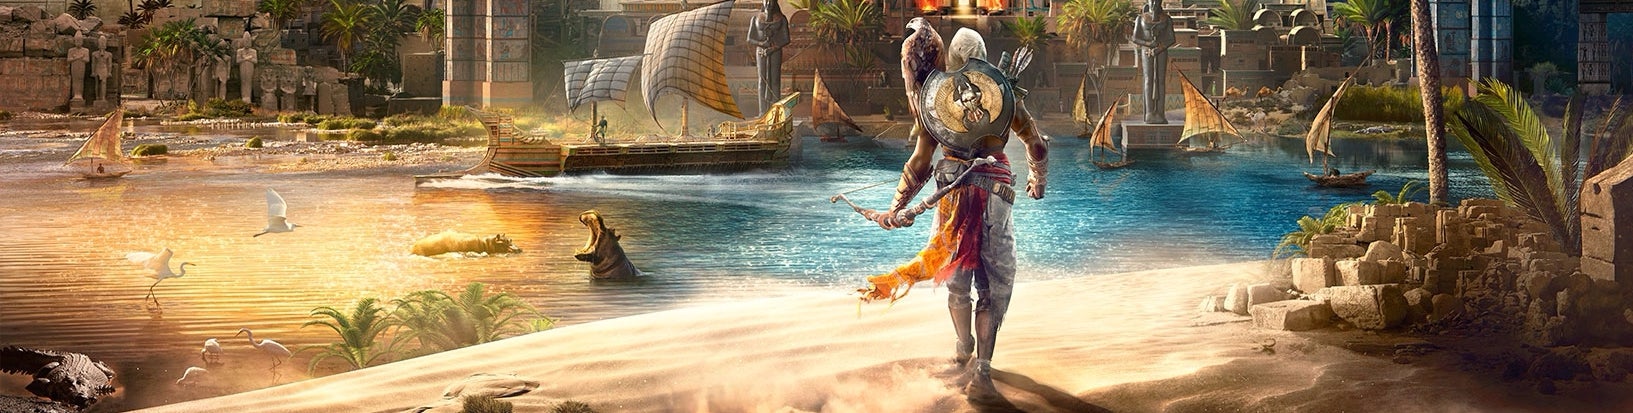 Image for Assassin's Creed Origins: Xbox One X is improved, but to what extent?